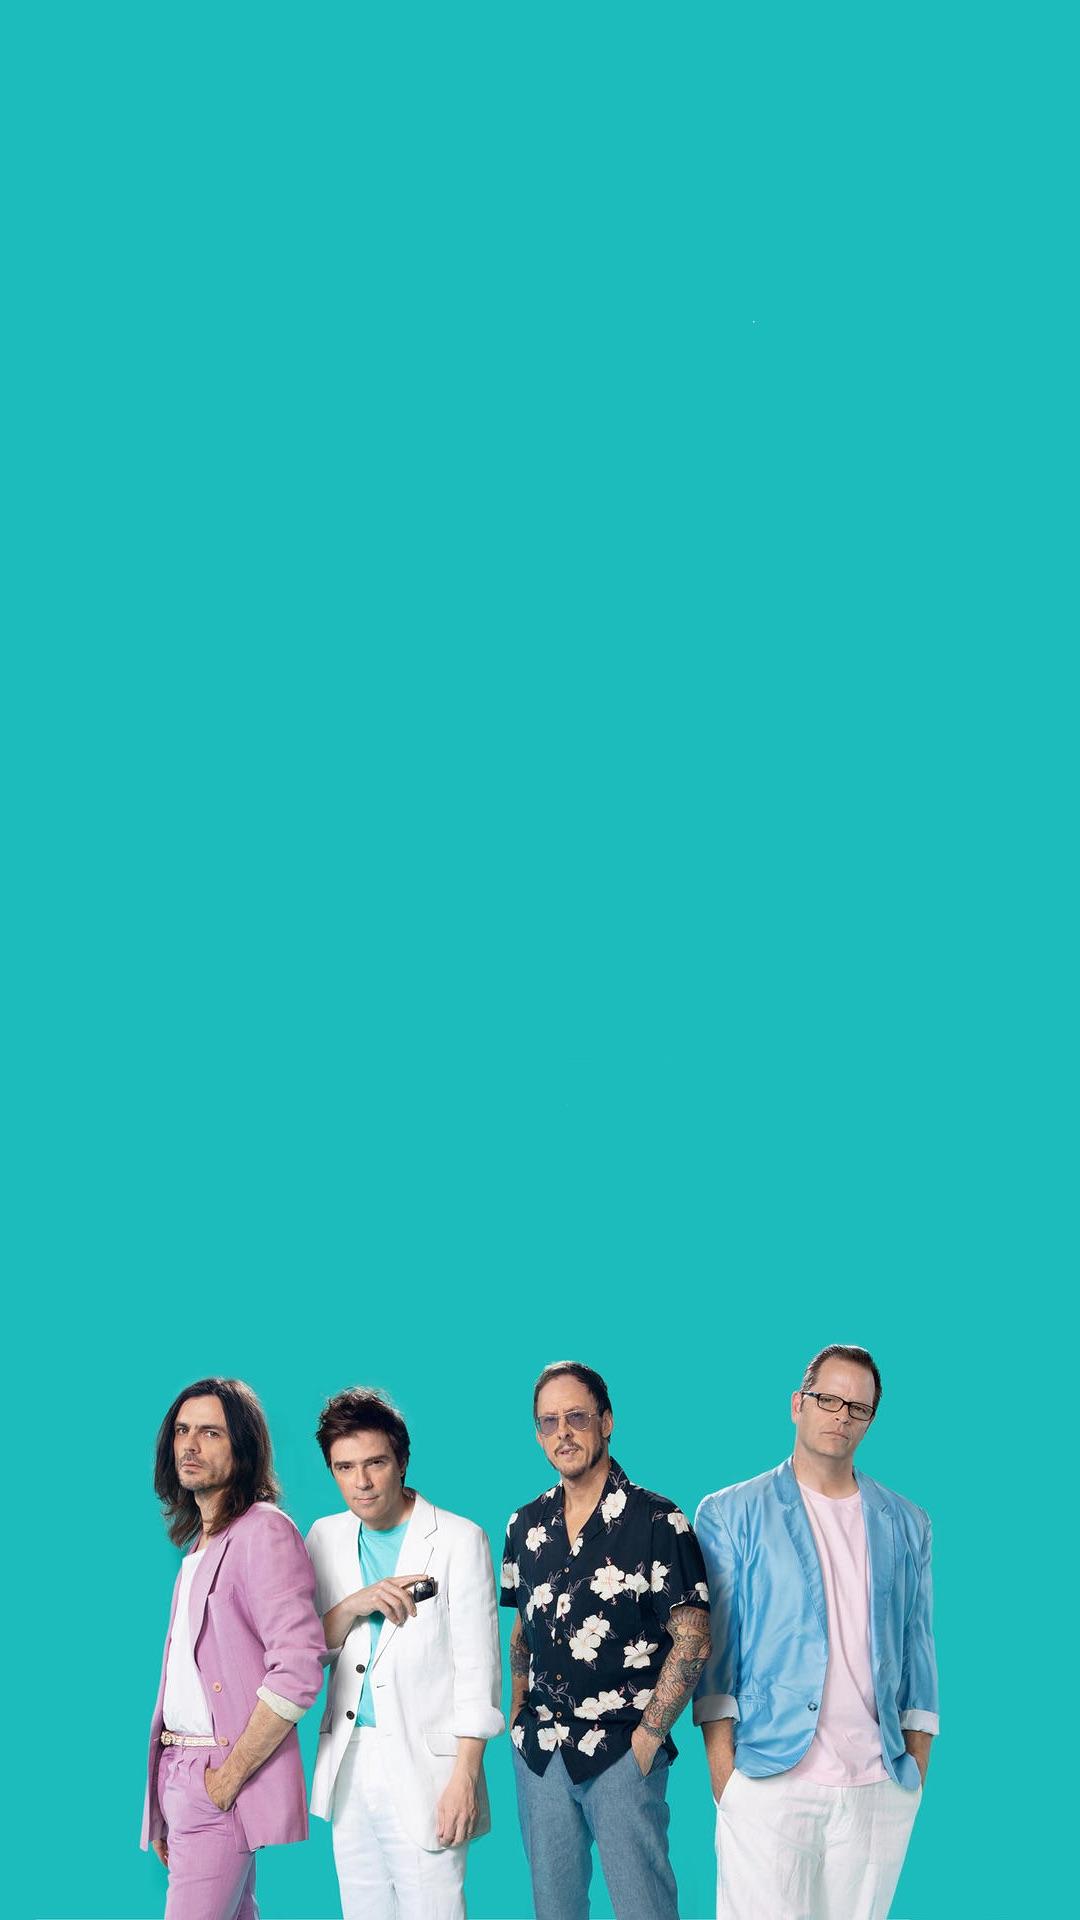 I Whipped Up An iPhone Wallpaper If Anyone Wants It Weezer